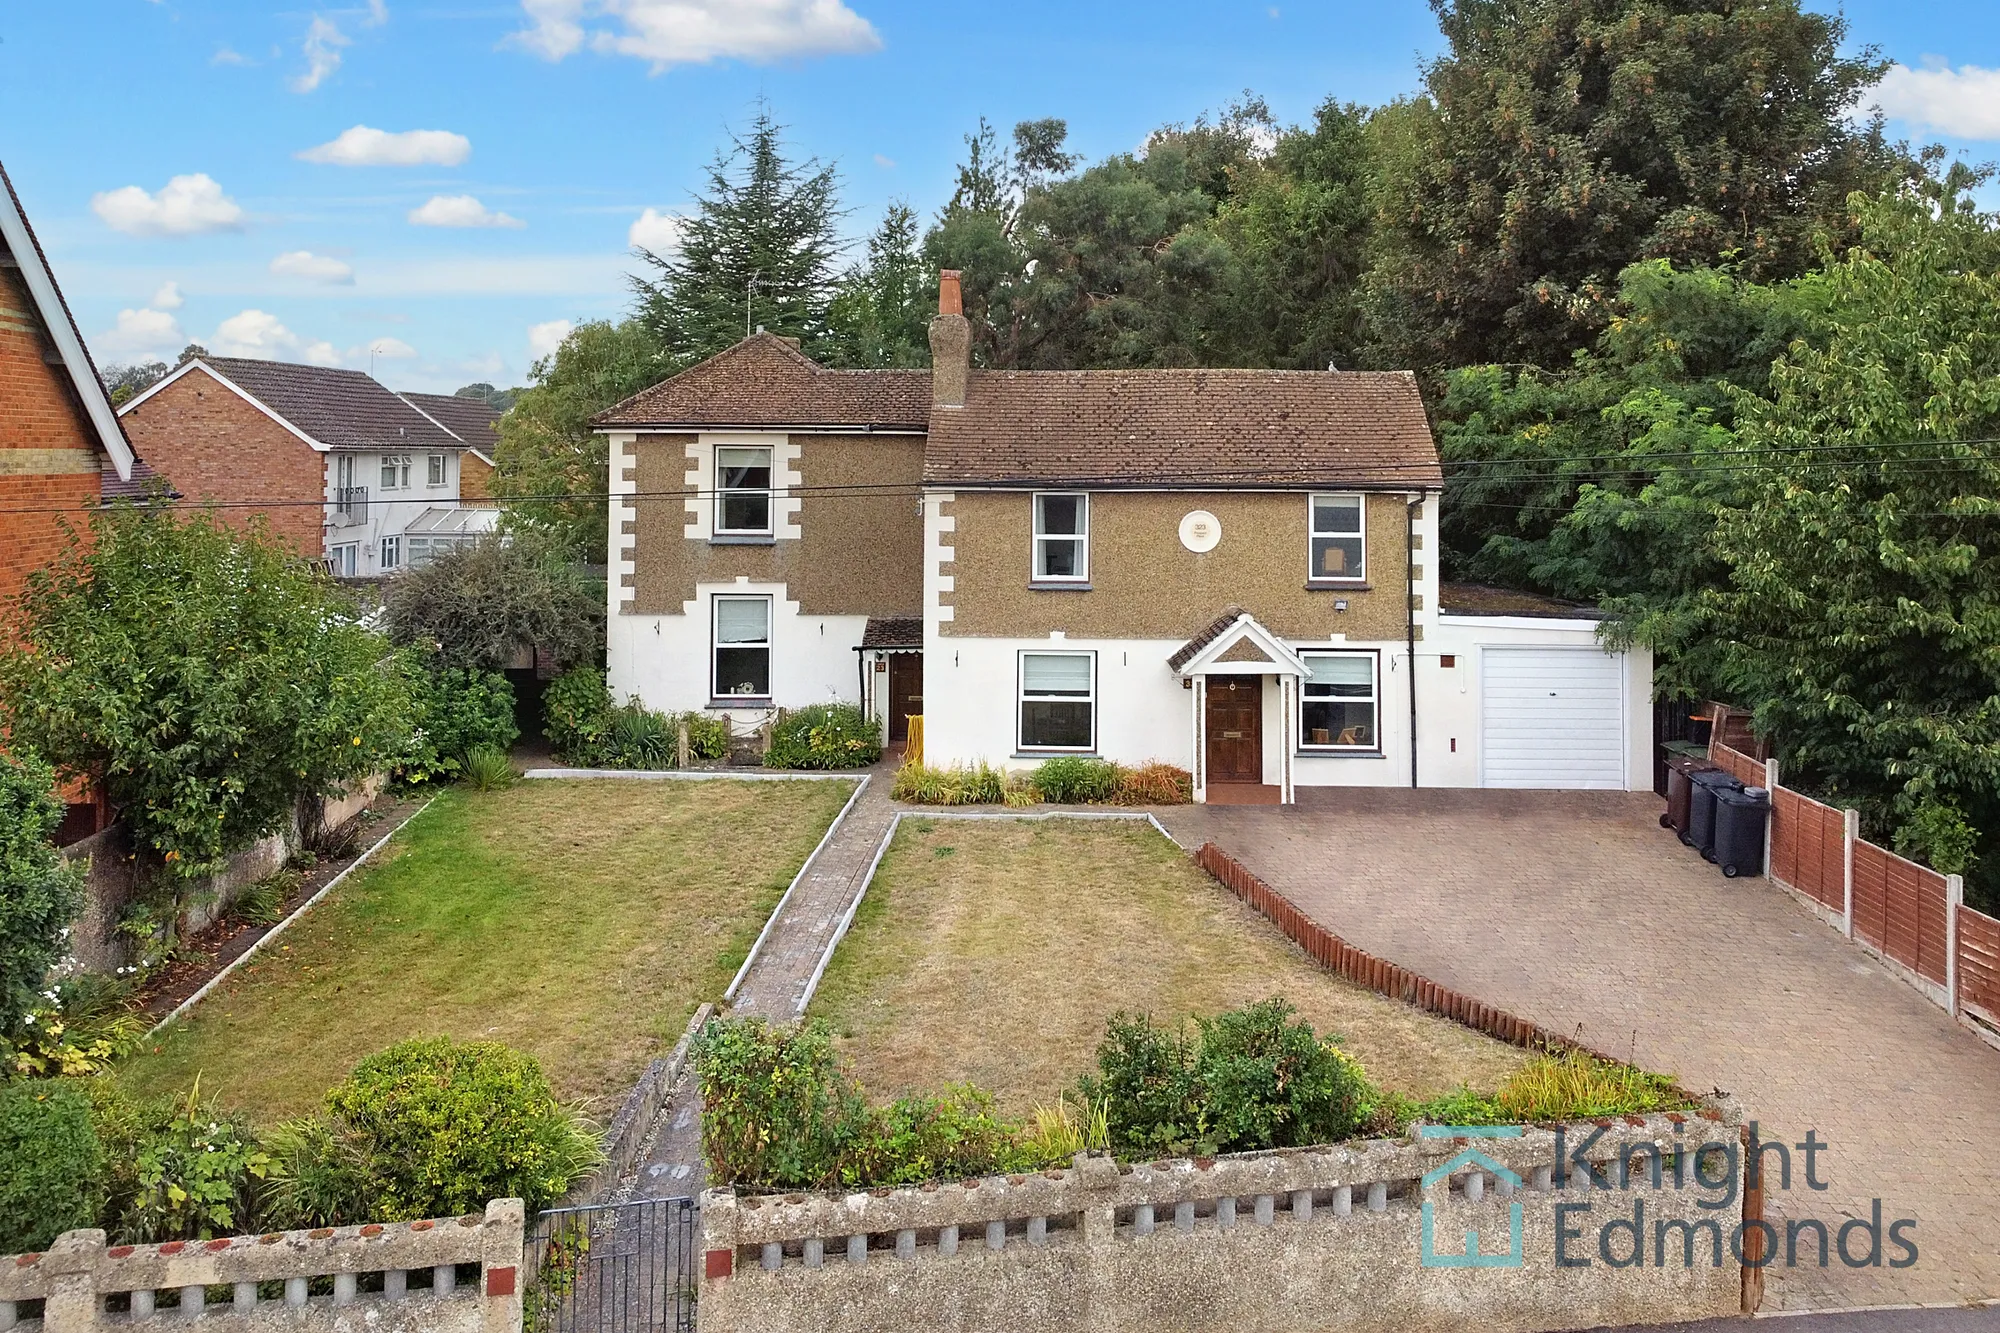 4 bed detached house for sale in Queens Road, Maidstone, ME16